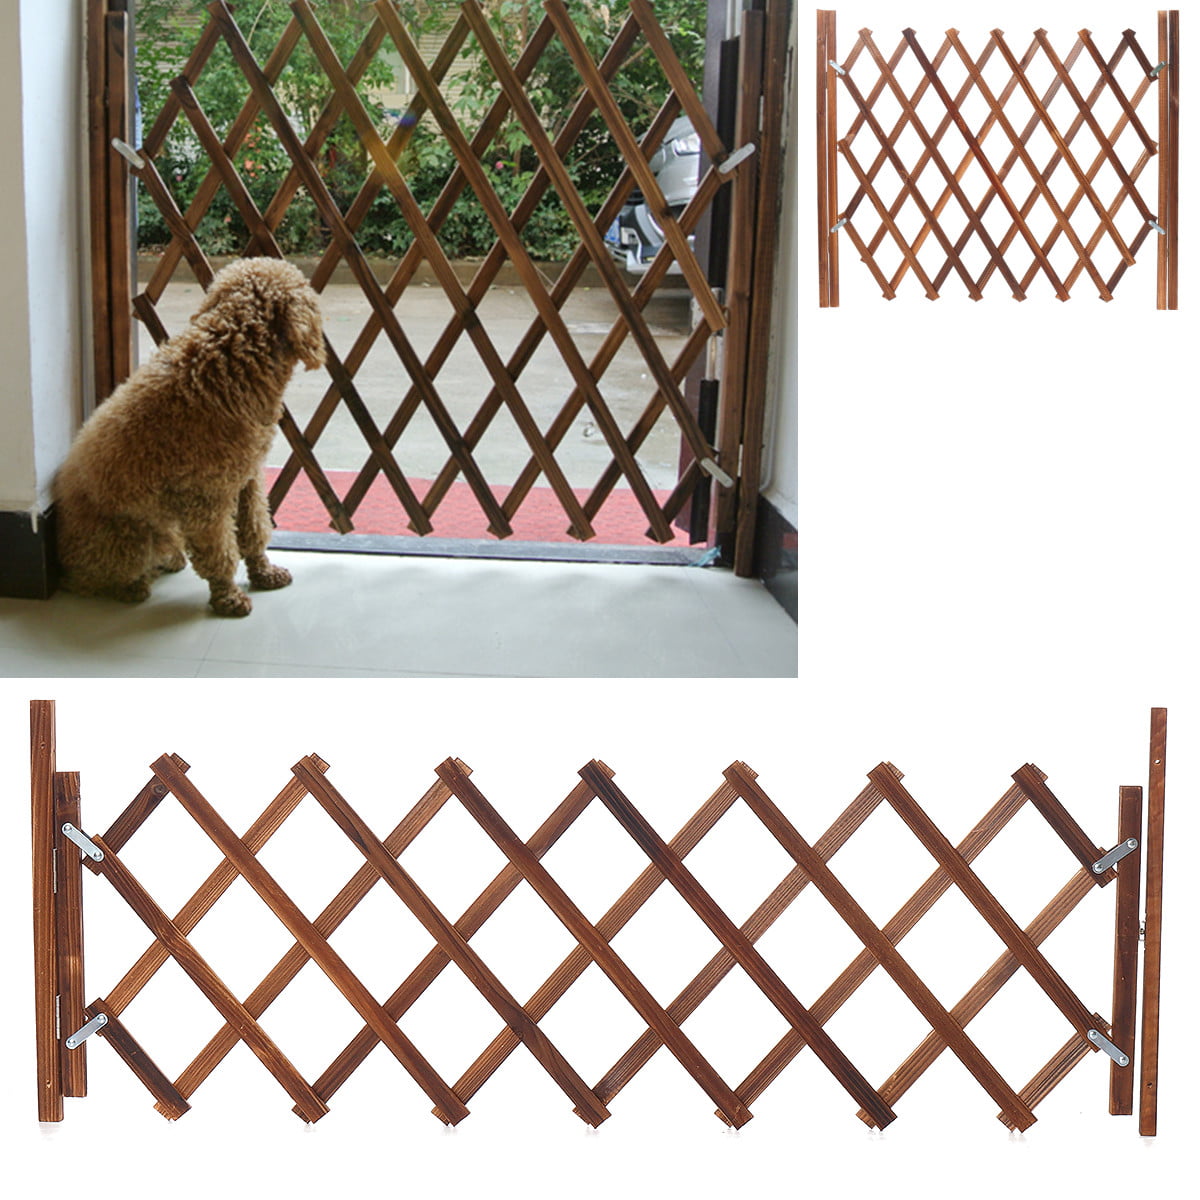 Extendable Instant Fence Wood, Outdoor Dog Gate